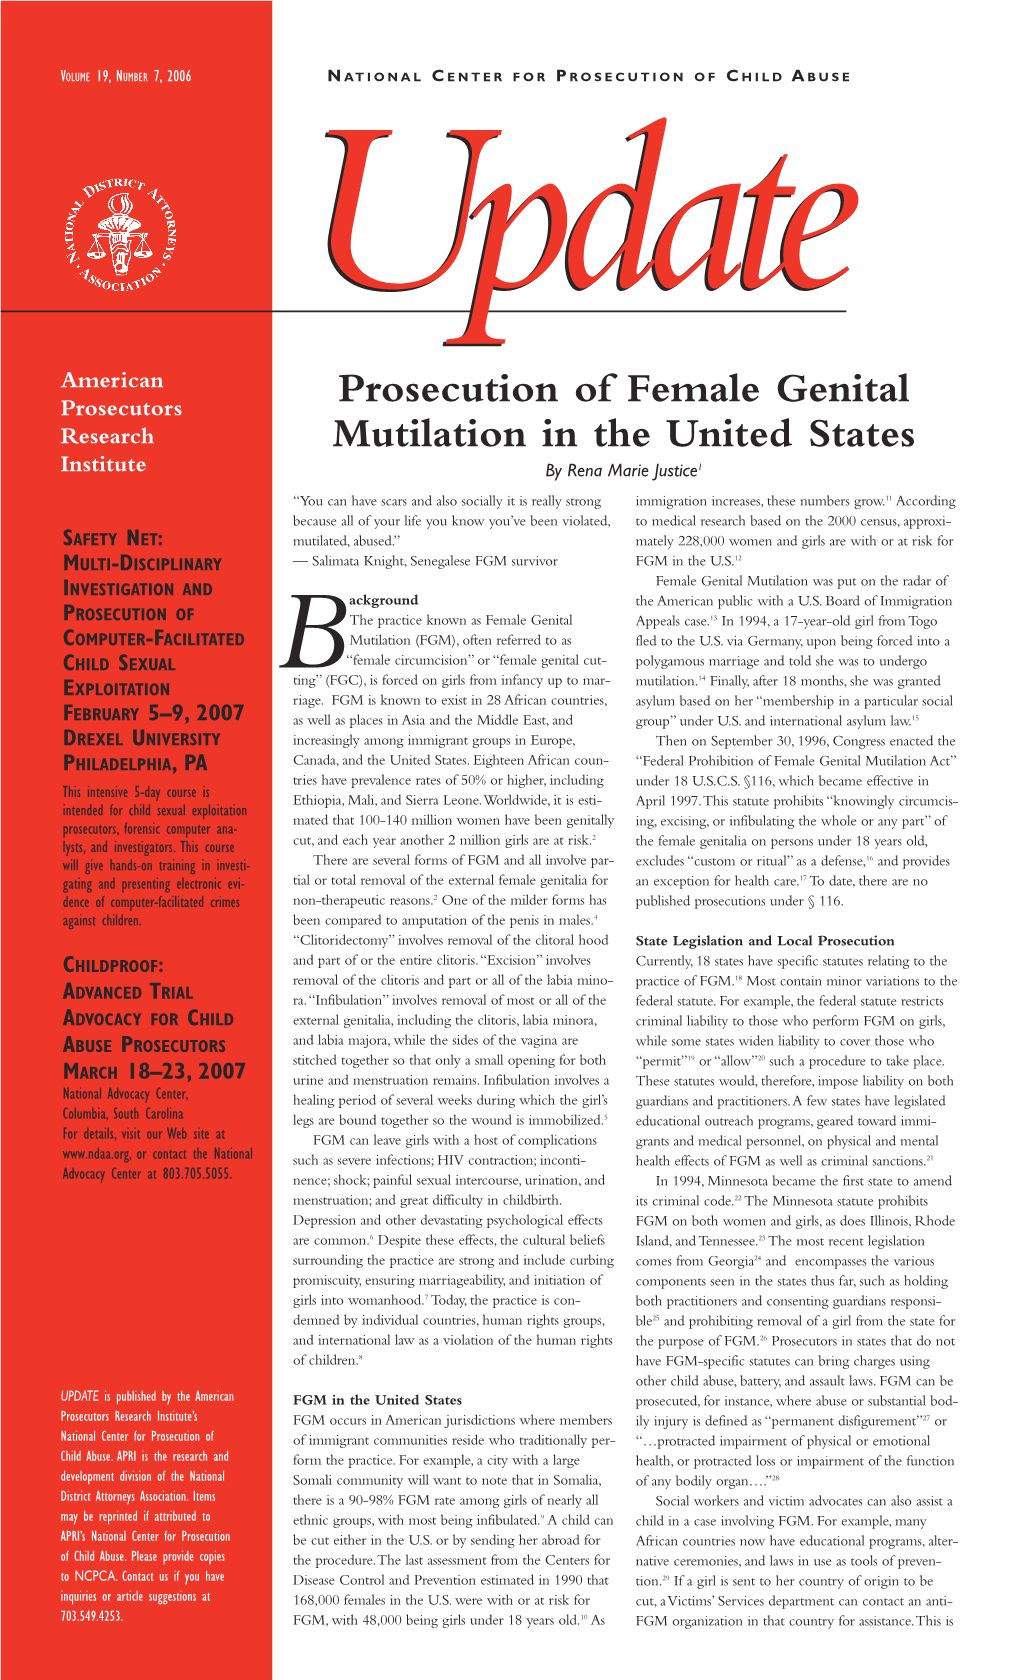 Prosecution of Female Genital Mutilation in the United States